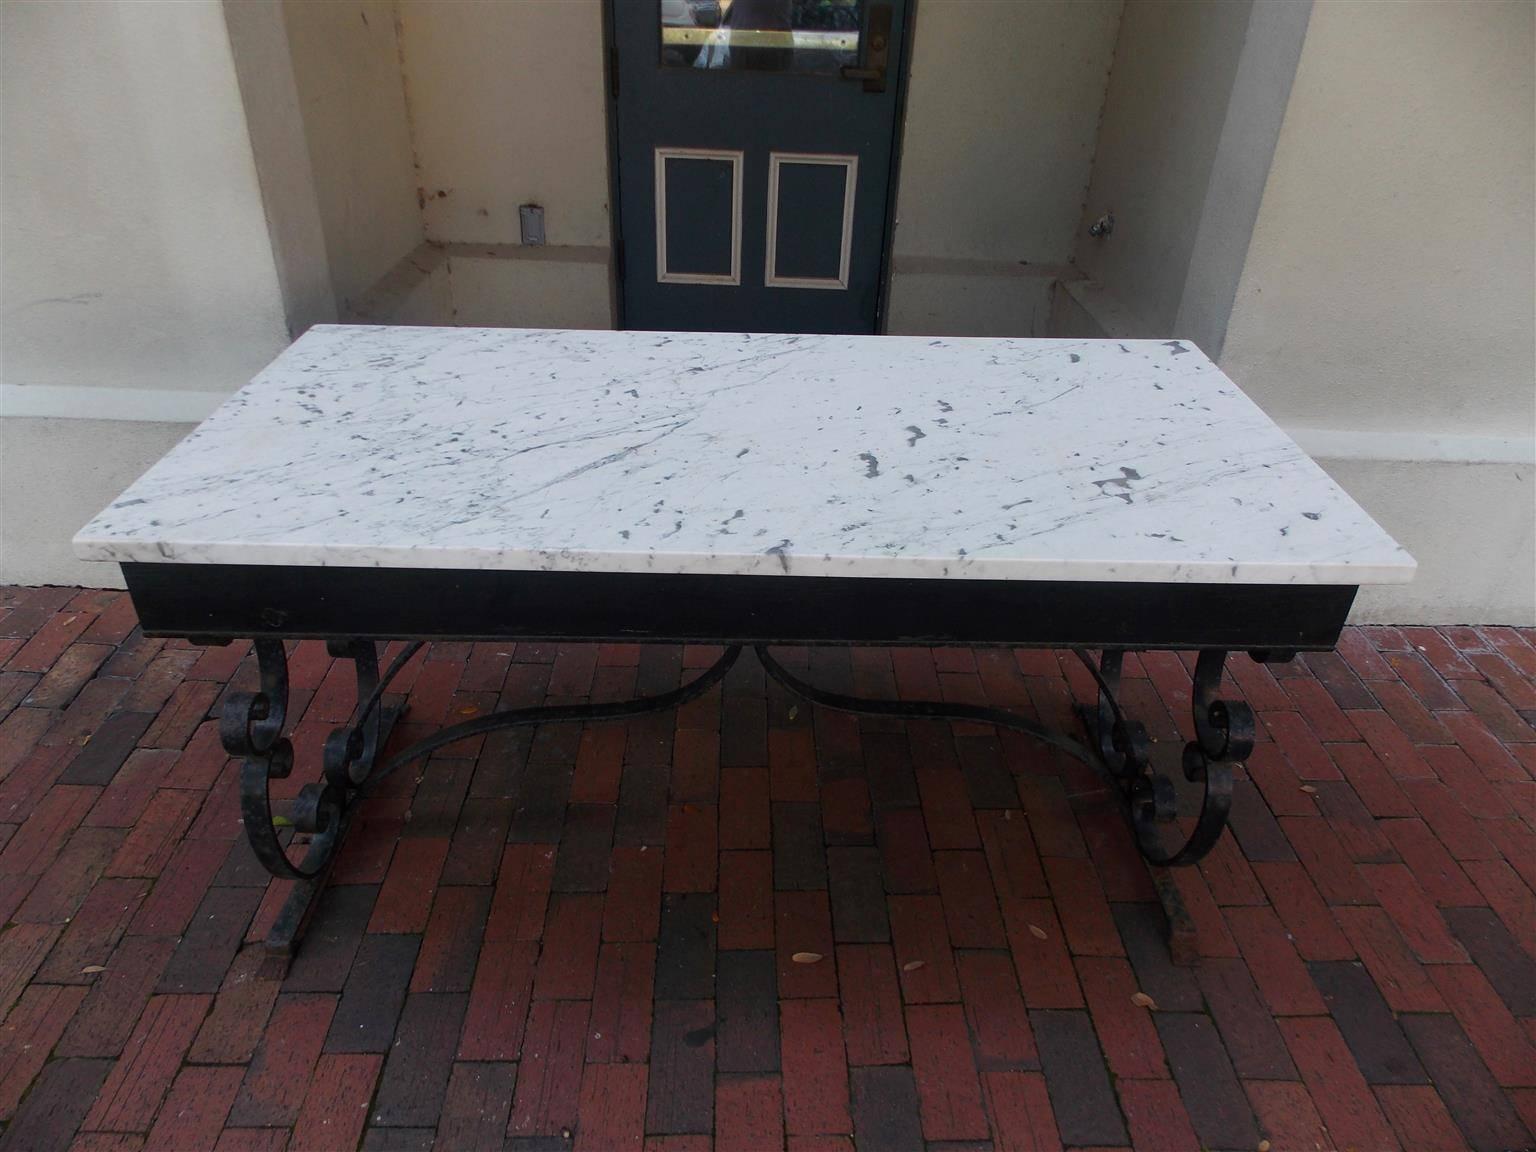 American wrought iron and marble top rectangular console with scrolled legs and connecting stretcher with acanthus leaf motif, Mid-19th century. Skirt height is 24.5